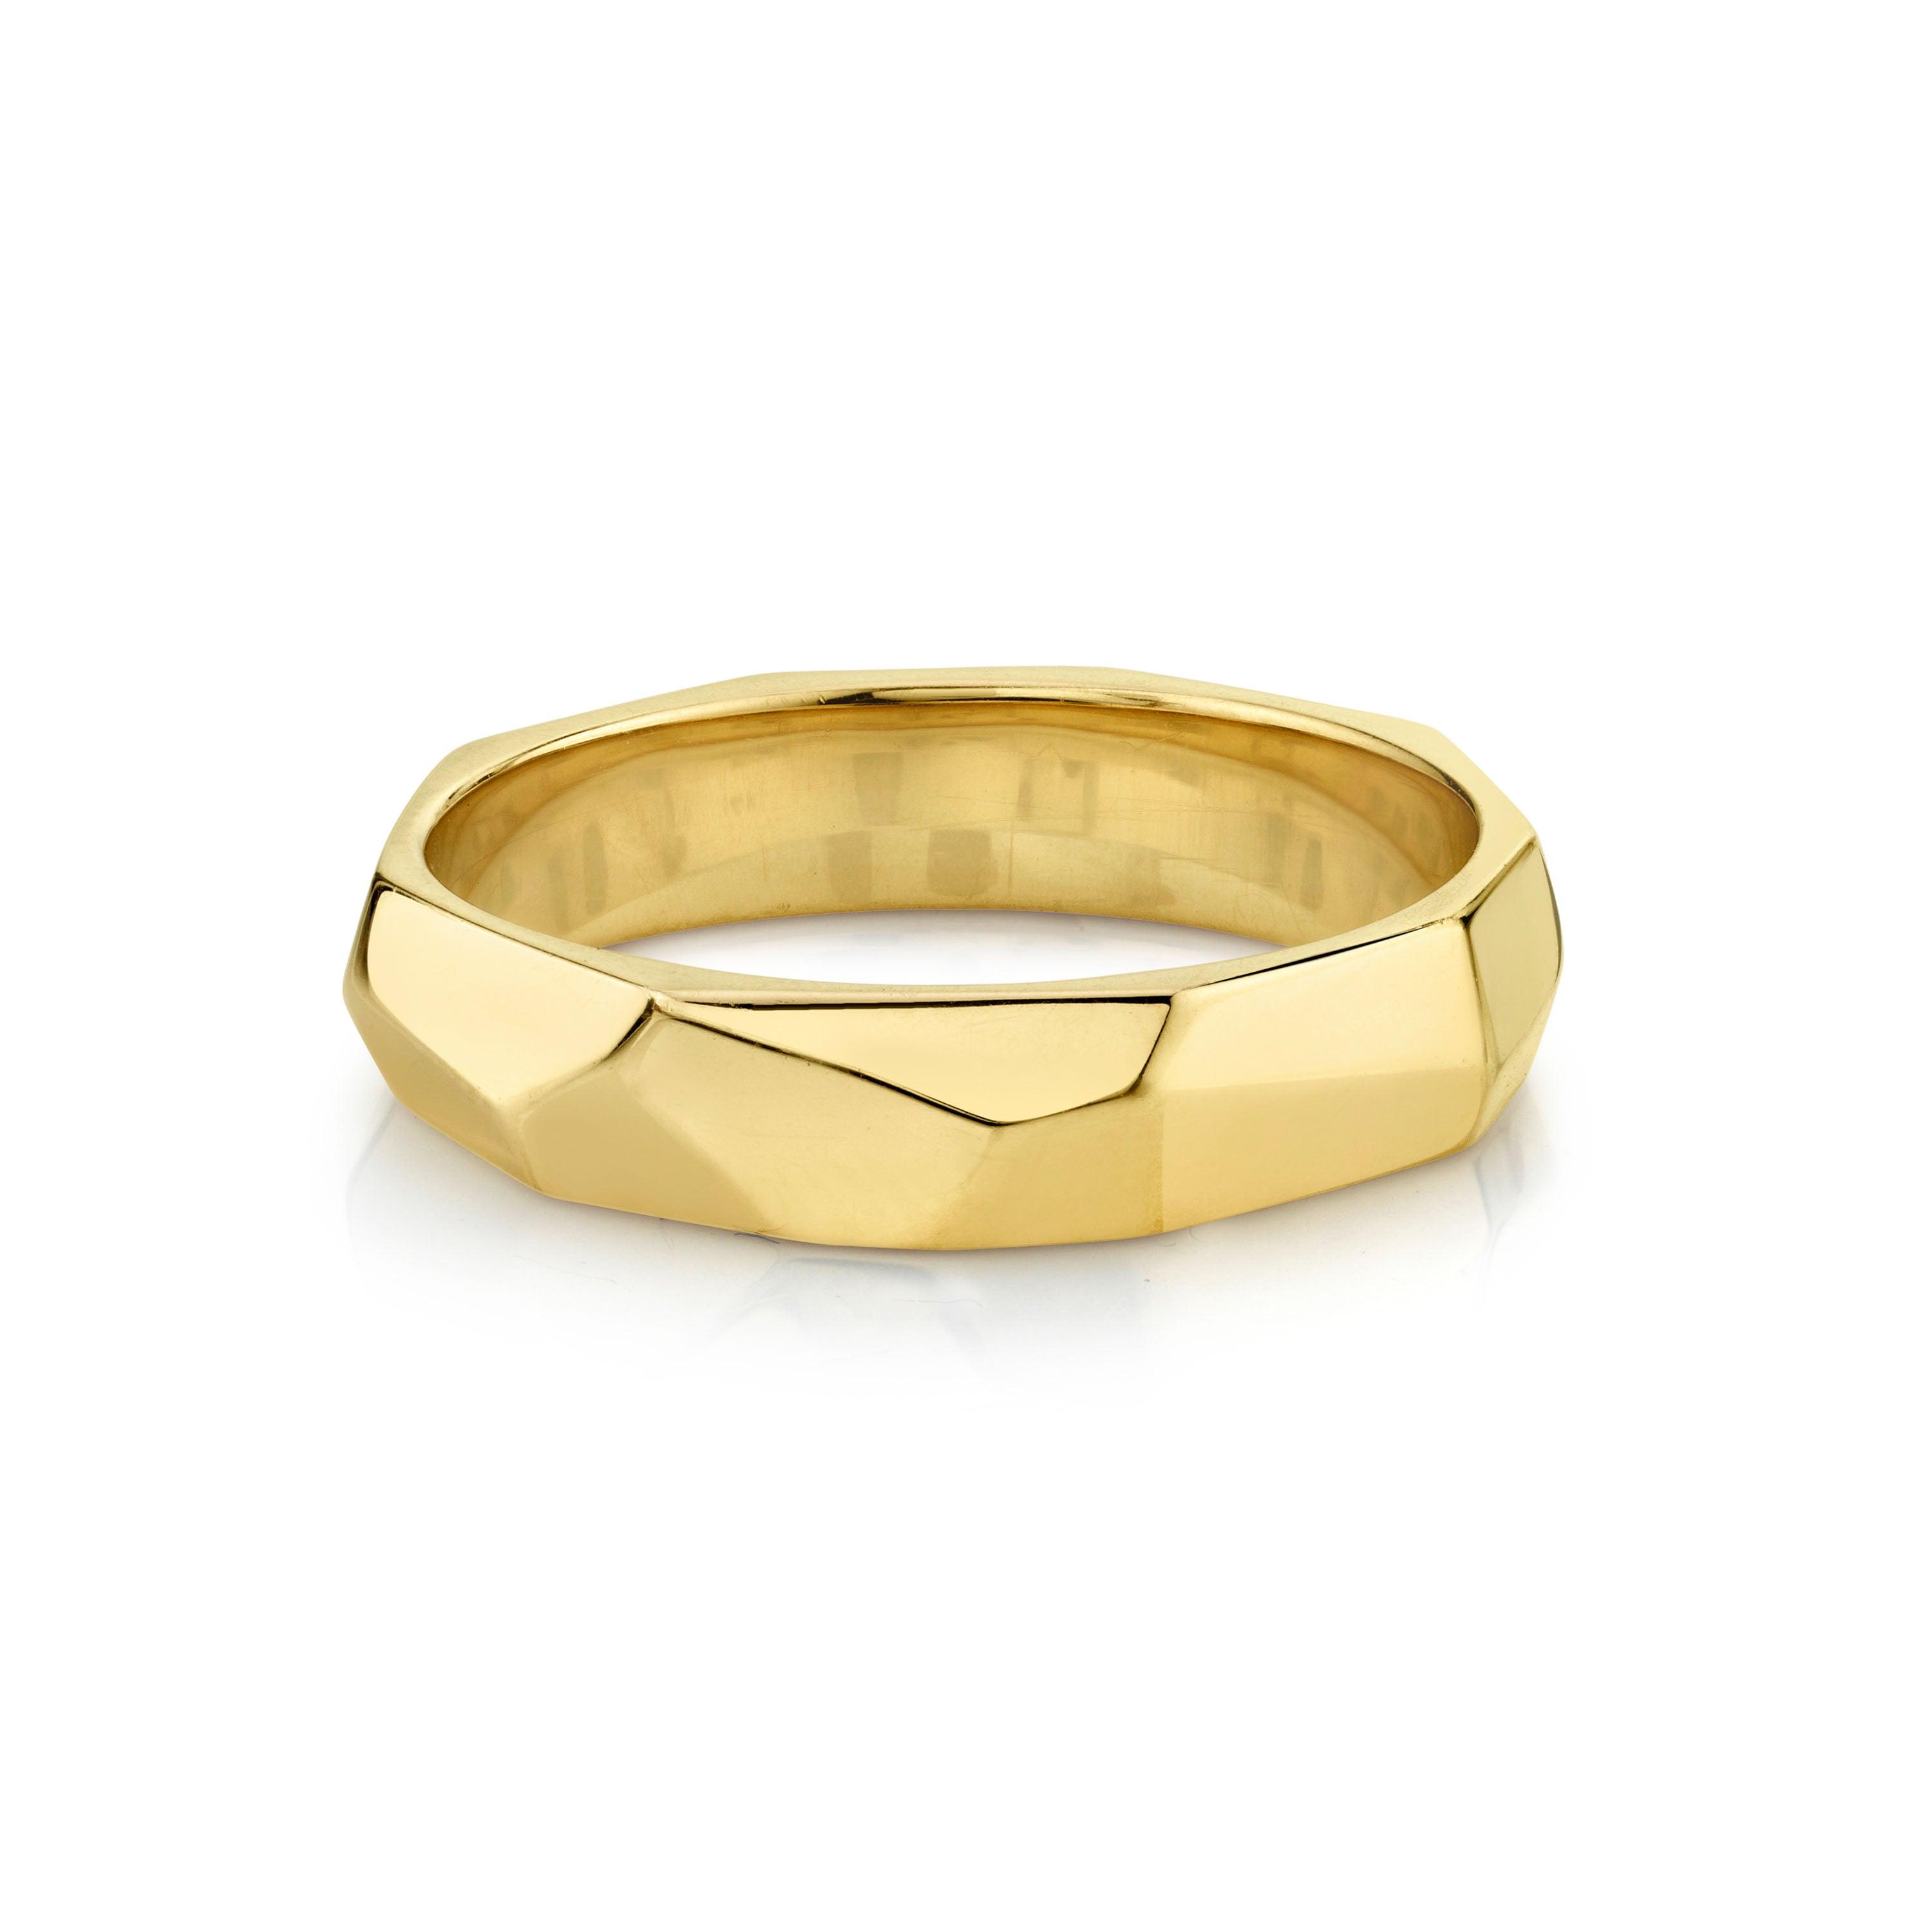 Band Yellow Gold 24k Fine Rings for Sale